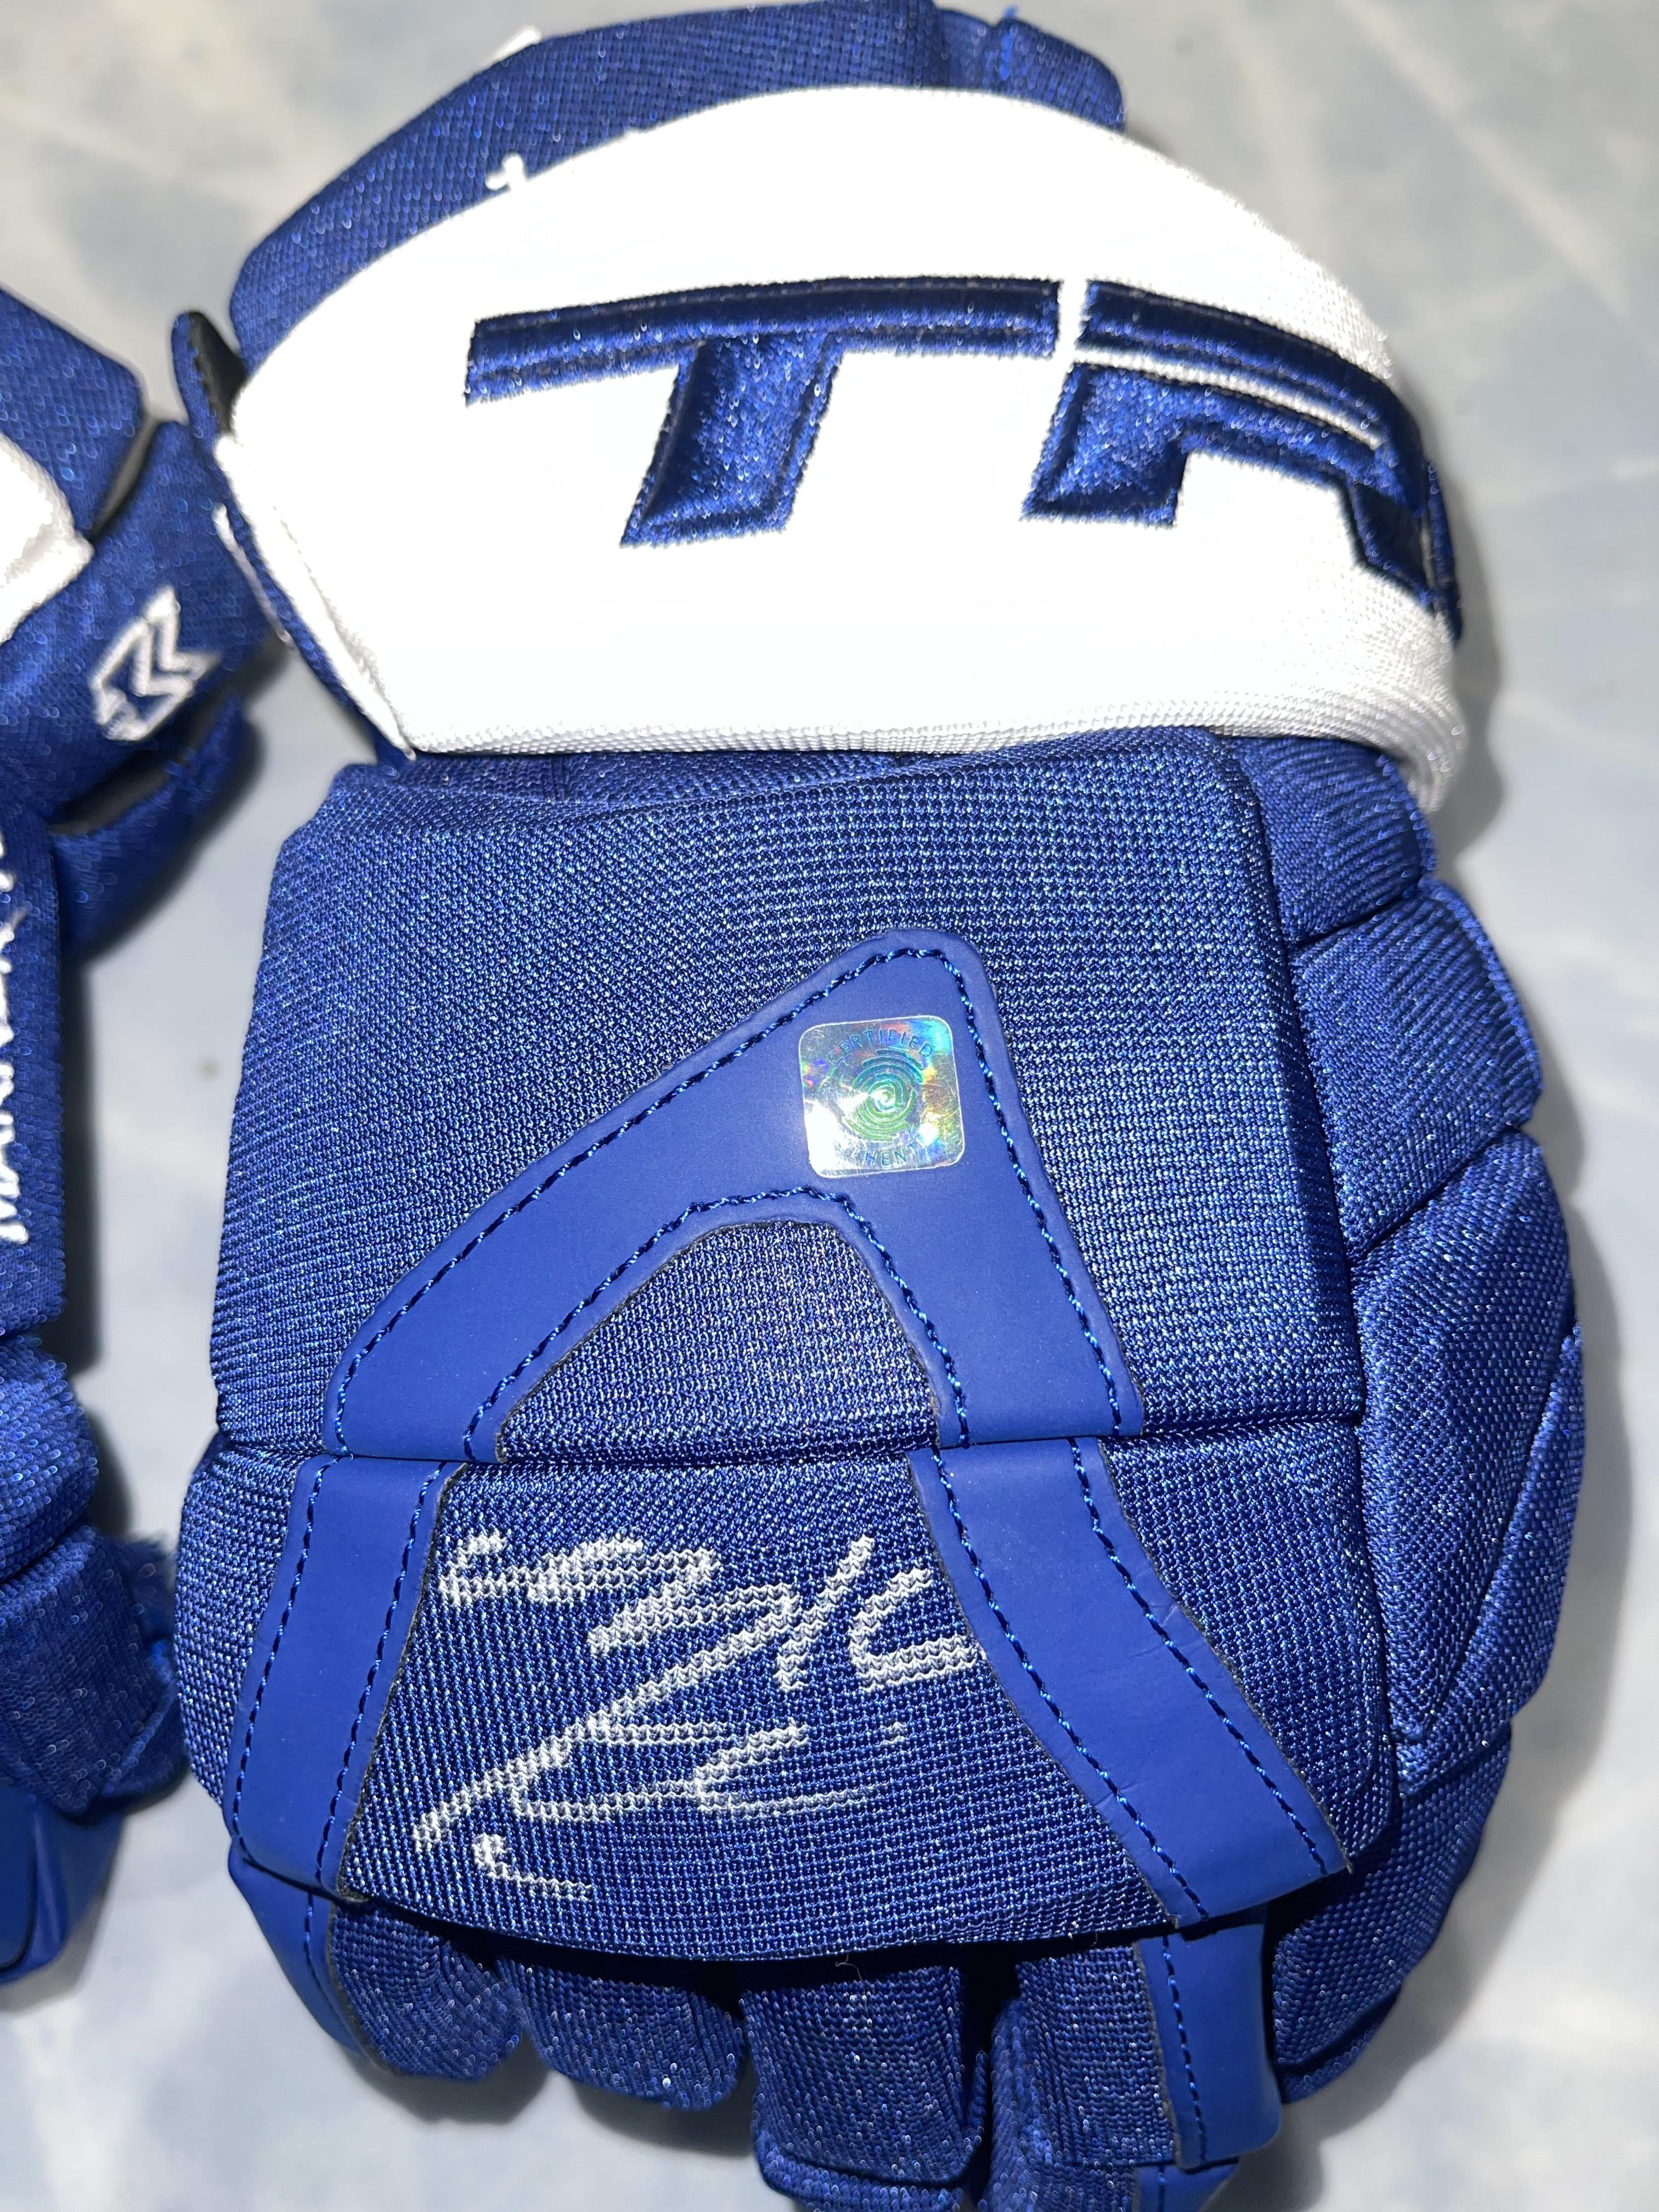 Mitch Marner signed game model TRUE gloves 👀 Yes, the gloves are